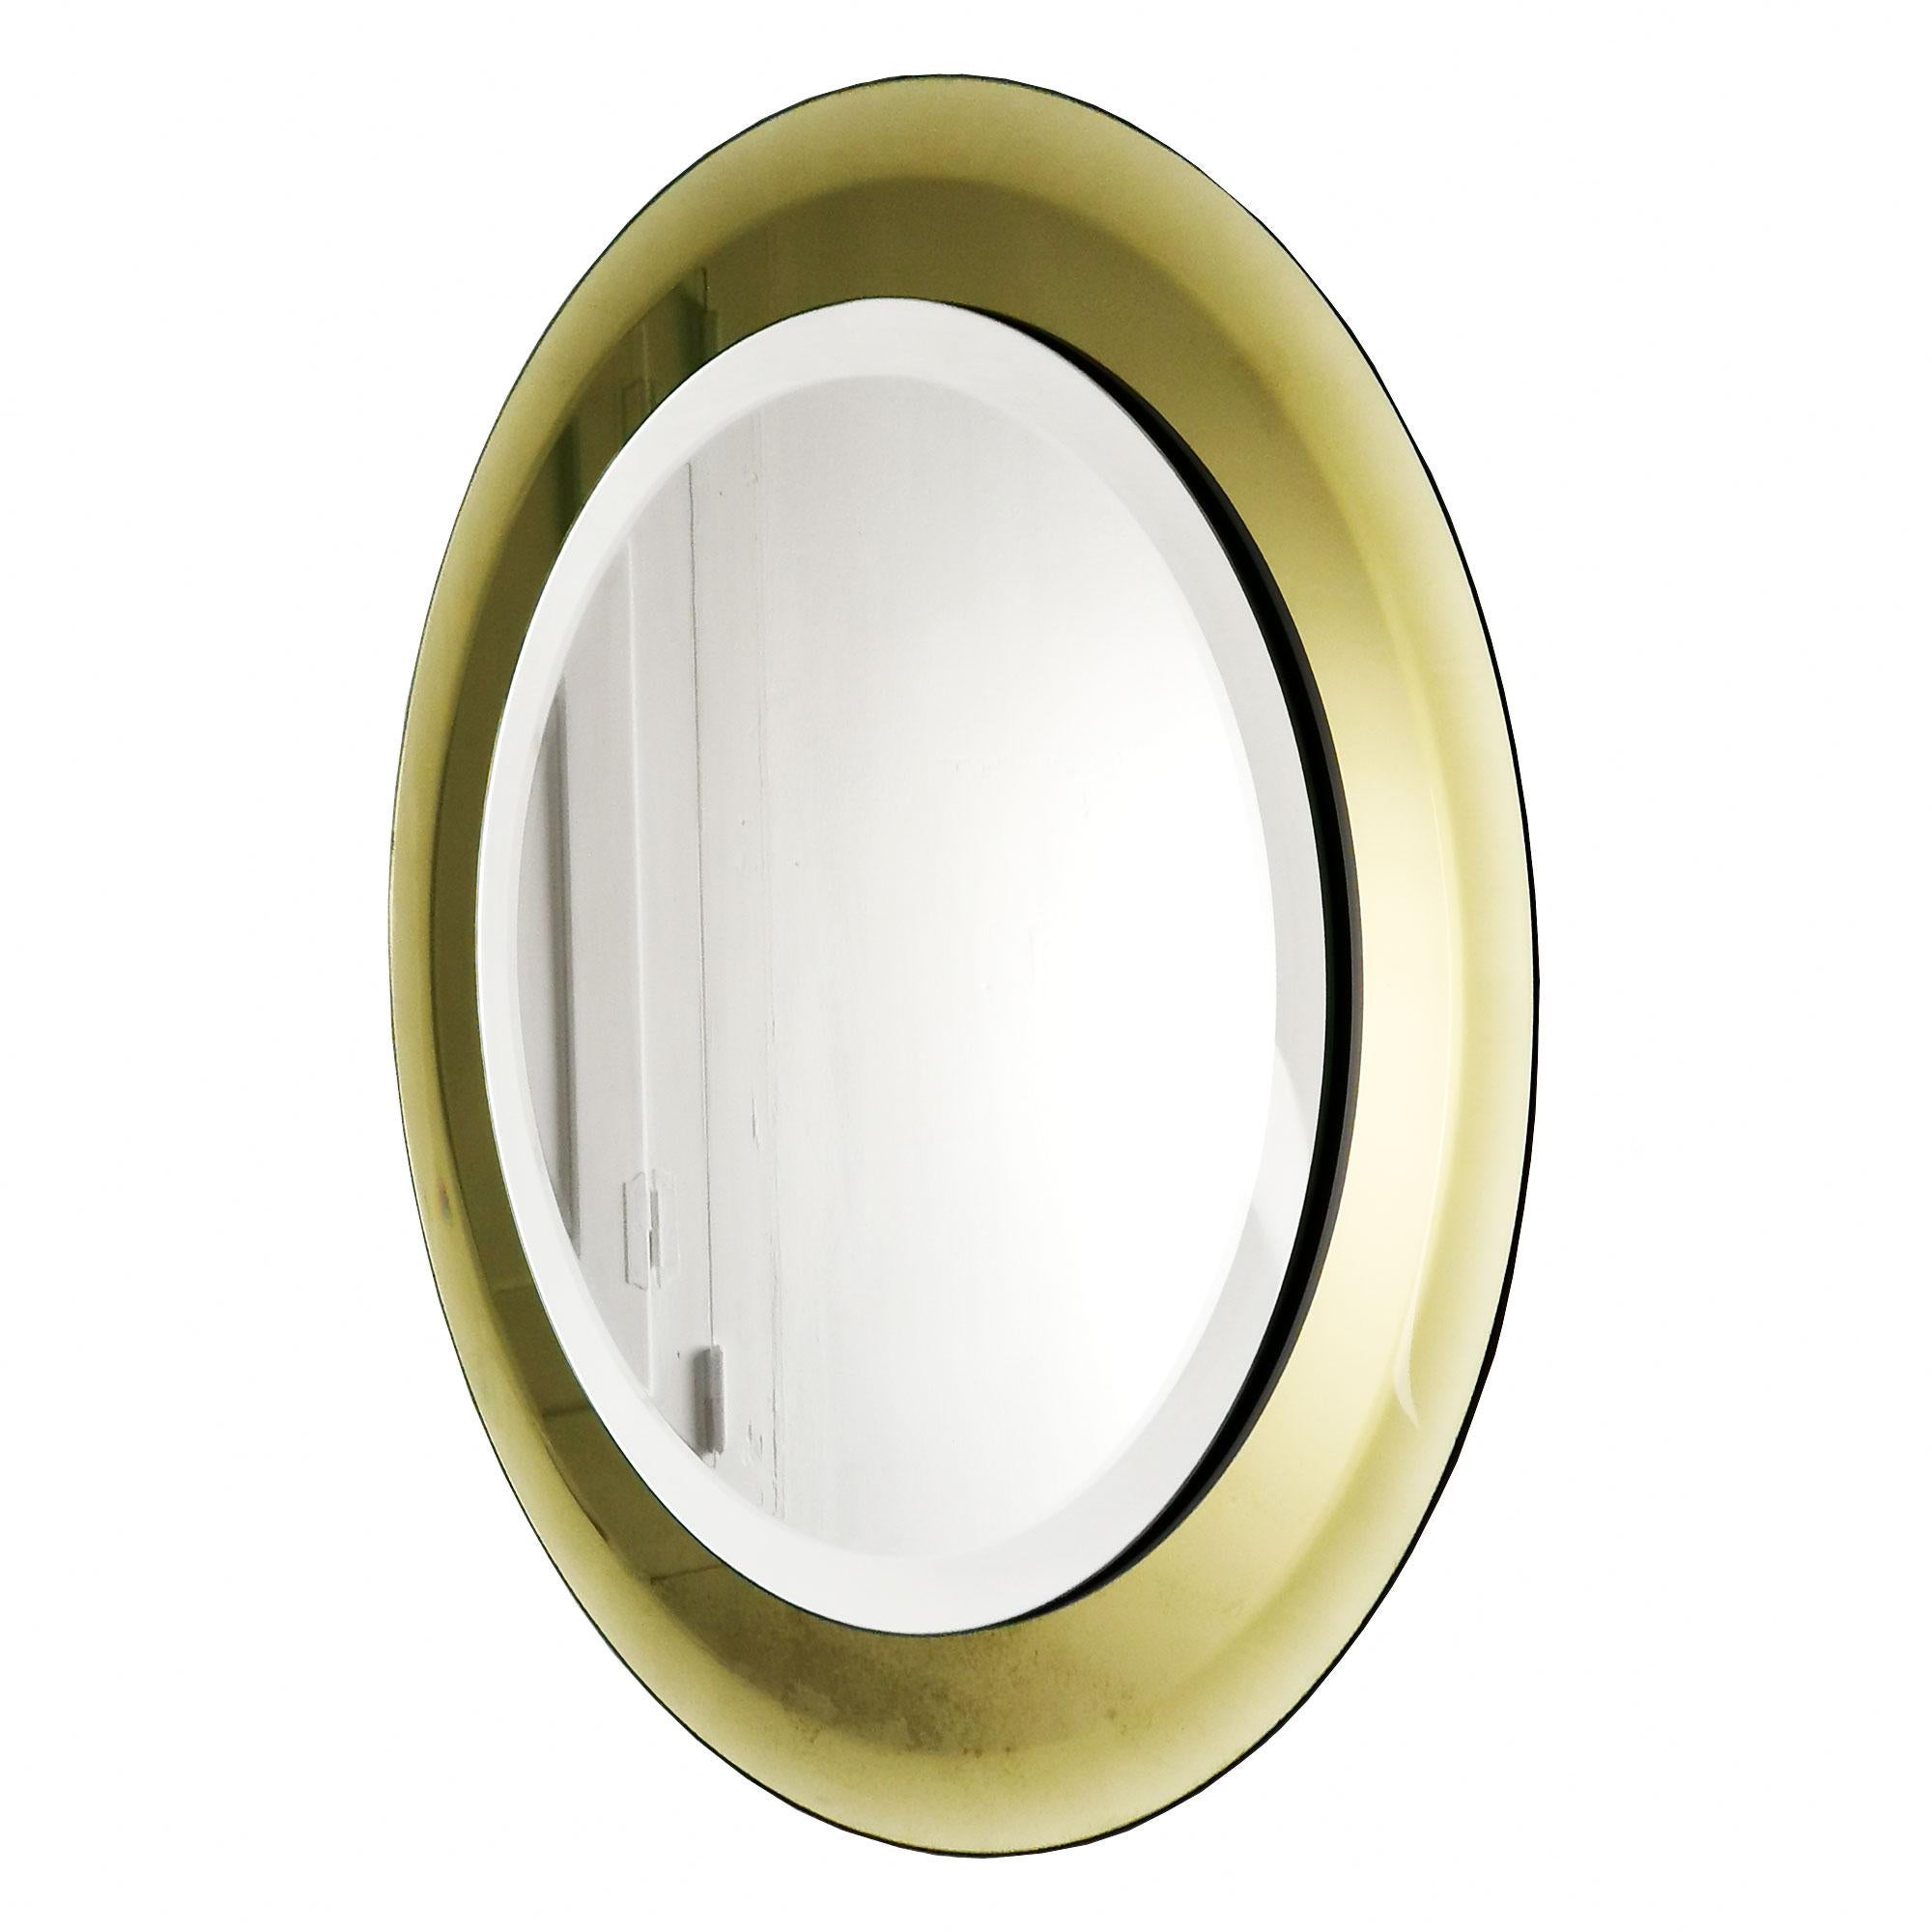 Round beveled mirror with a golden yellow beveled mirror frame.

Italy c. 1960.